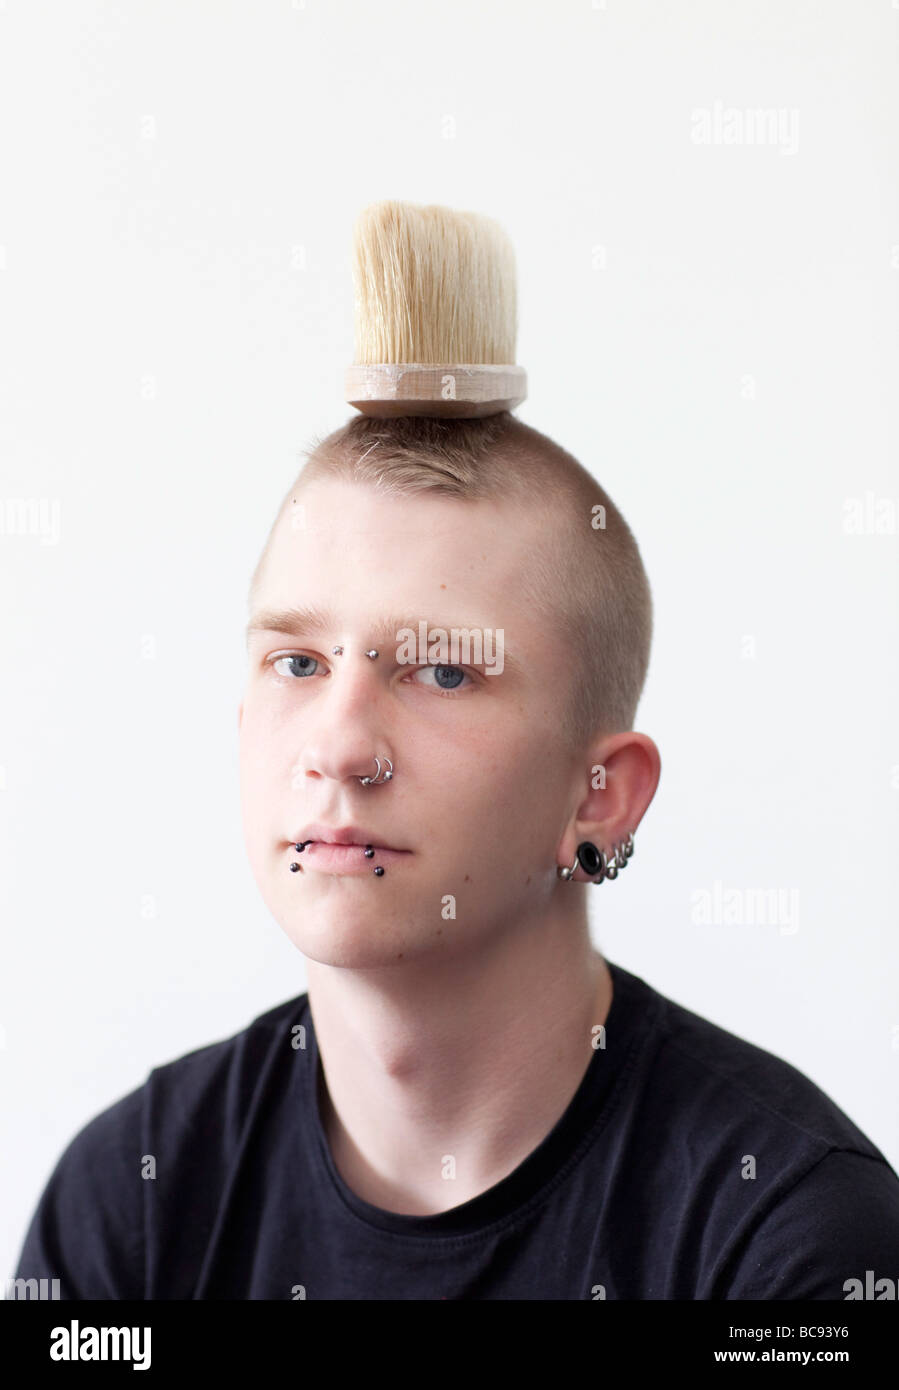 Punker with a brush on his head Stock Photo